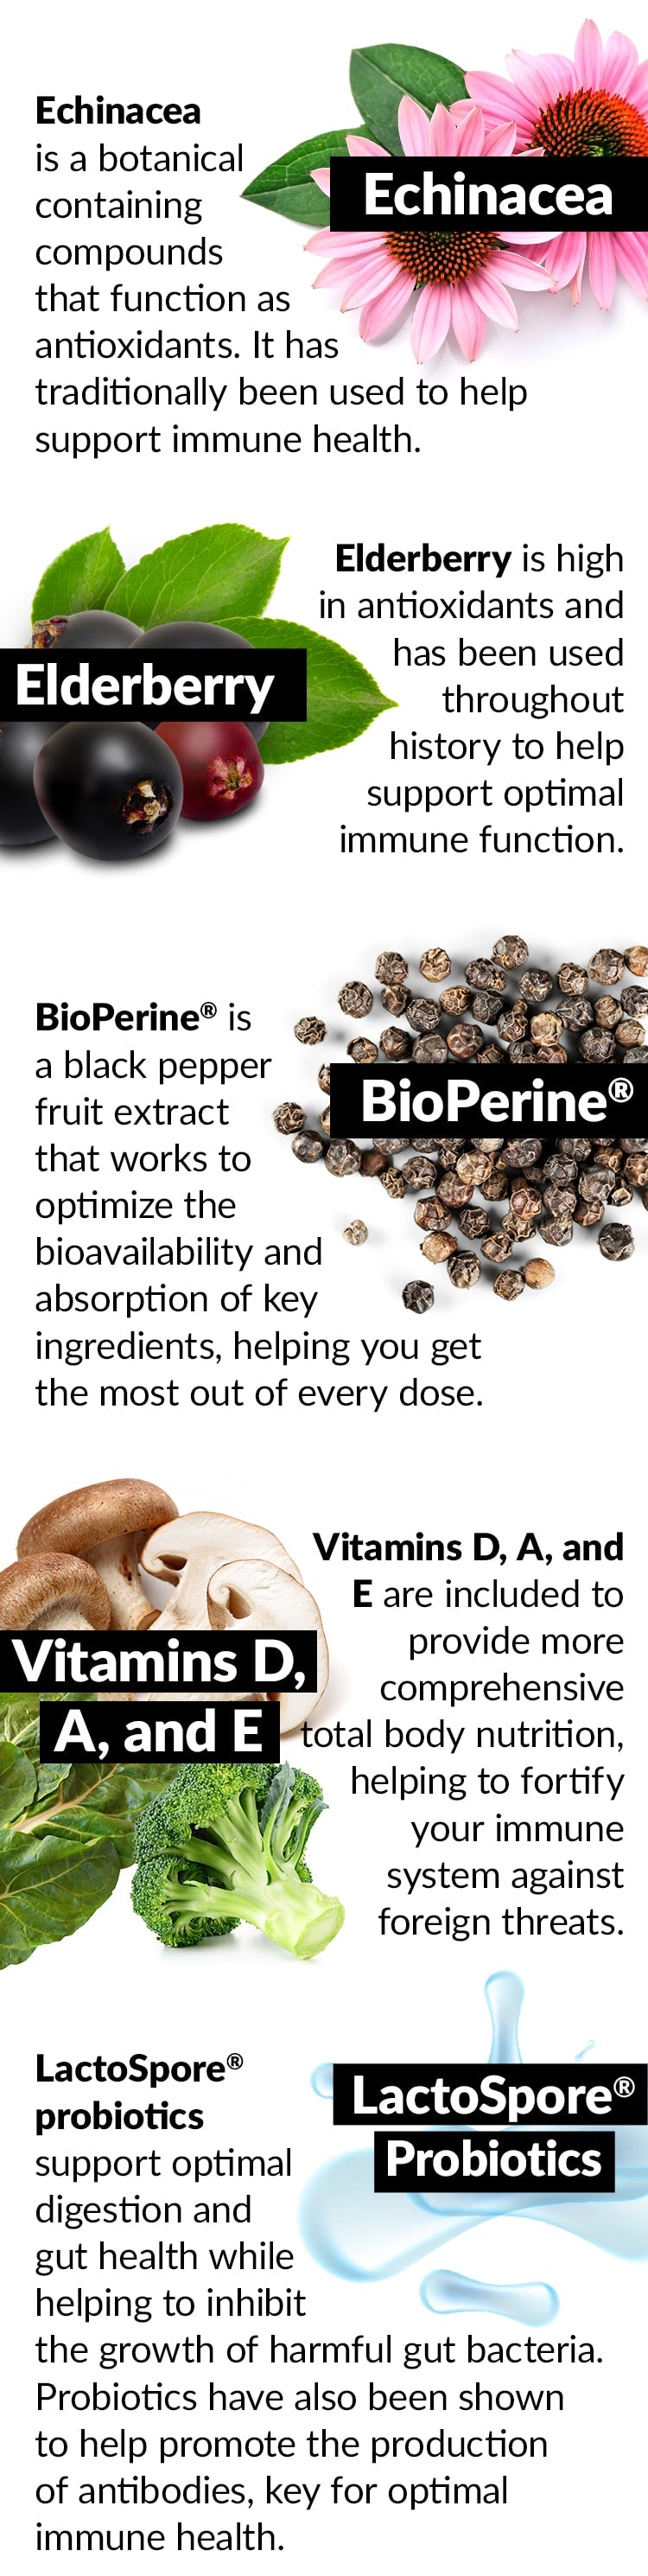 Echinacea is a botanical containing compounds that function as antioxidants. It has traditionally been used to help support immune health. BioPerine® is a black pepper fruit extract that works to optimize the bioavailability and absorption of key ingredients, helping you get the most out of every dose. PLUS: Vitamins D, A, and E are included to provide more comprehensive total body nutrition, helping to fortify your immune system against foreign threats. LactoSpore® probiotics support optimal digestion and gut health while helping to inhibit the growth of harmful gut bacteria. Probiotics have also been shown to help promote the production of antibodies, key for optimal immune health.